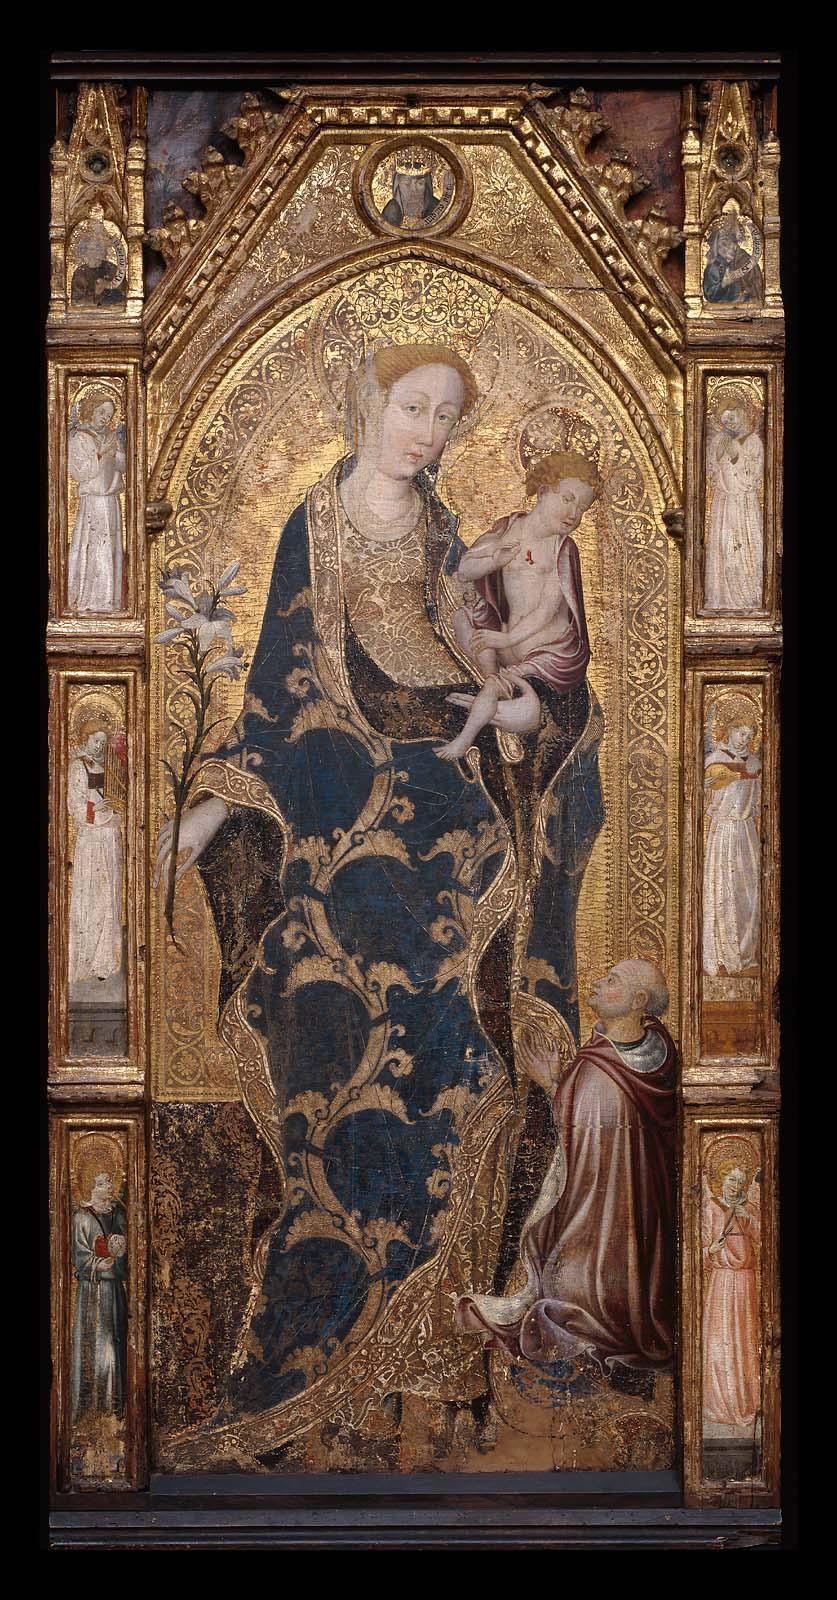 Painting in an architectural frame of Mary and Christ enthroned with smaller figures at sides. Covered in gold decoration